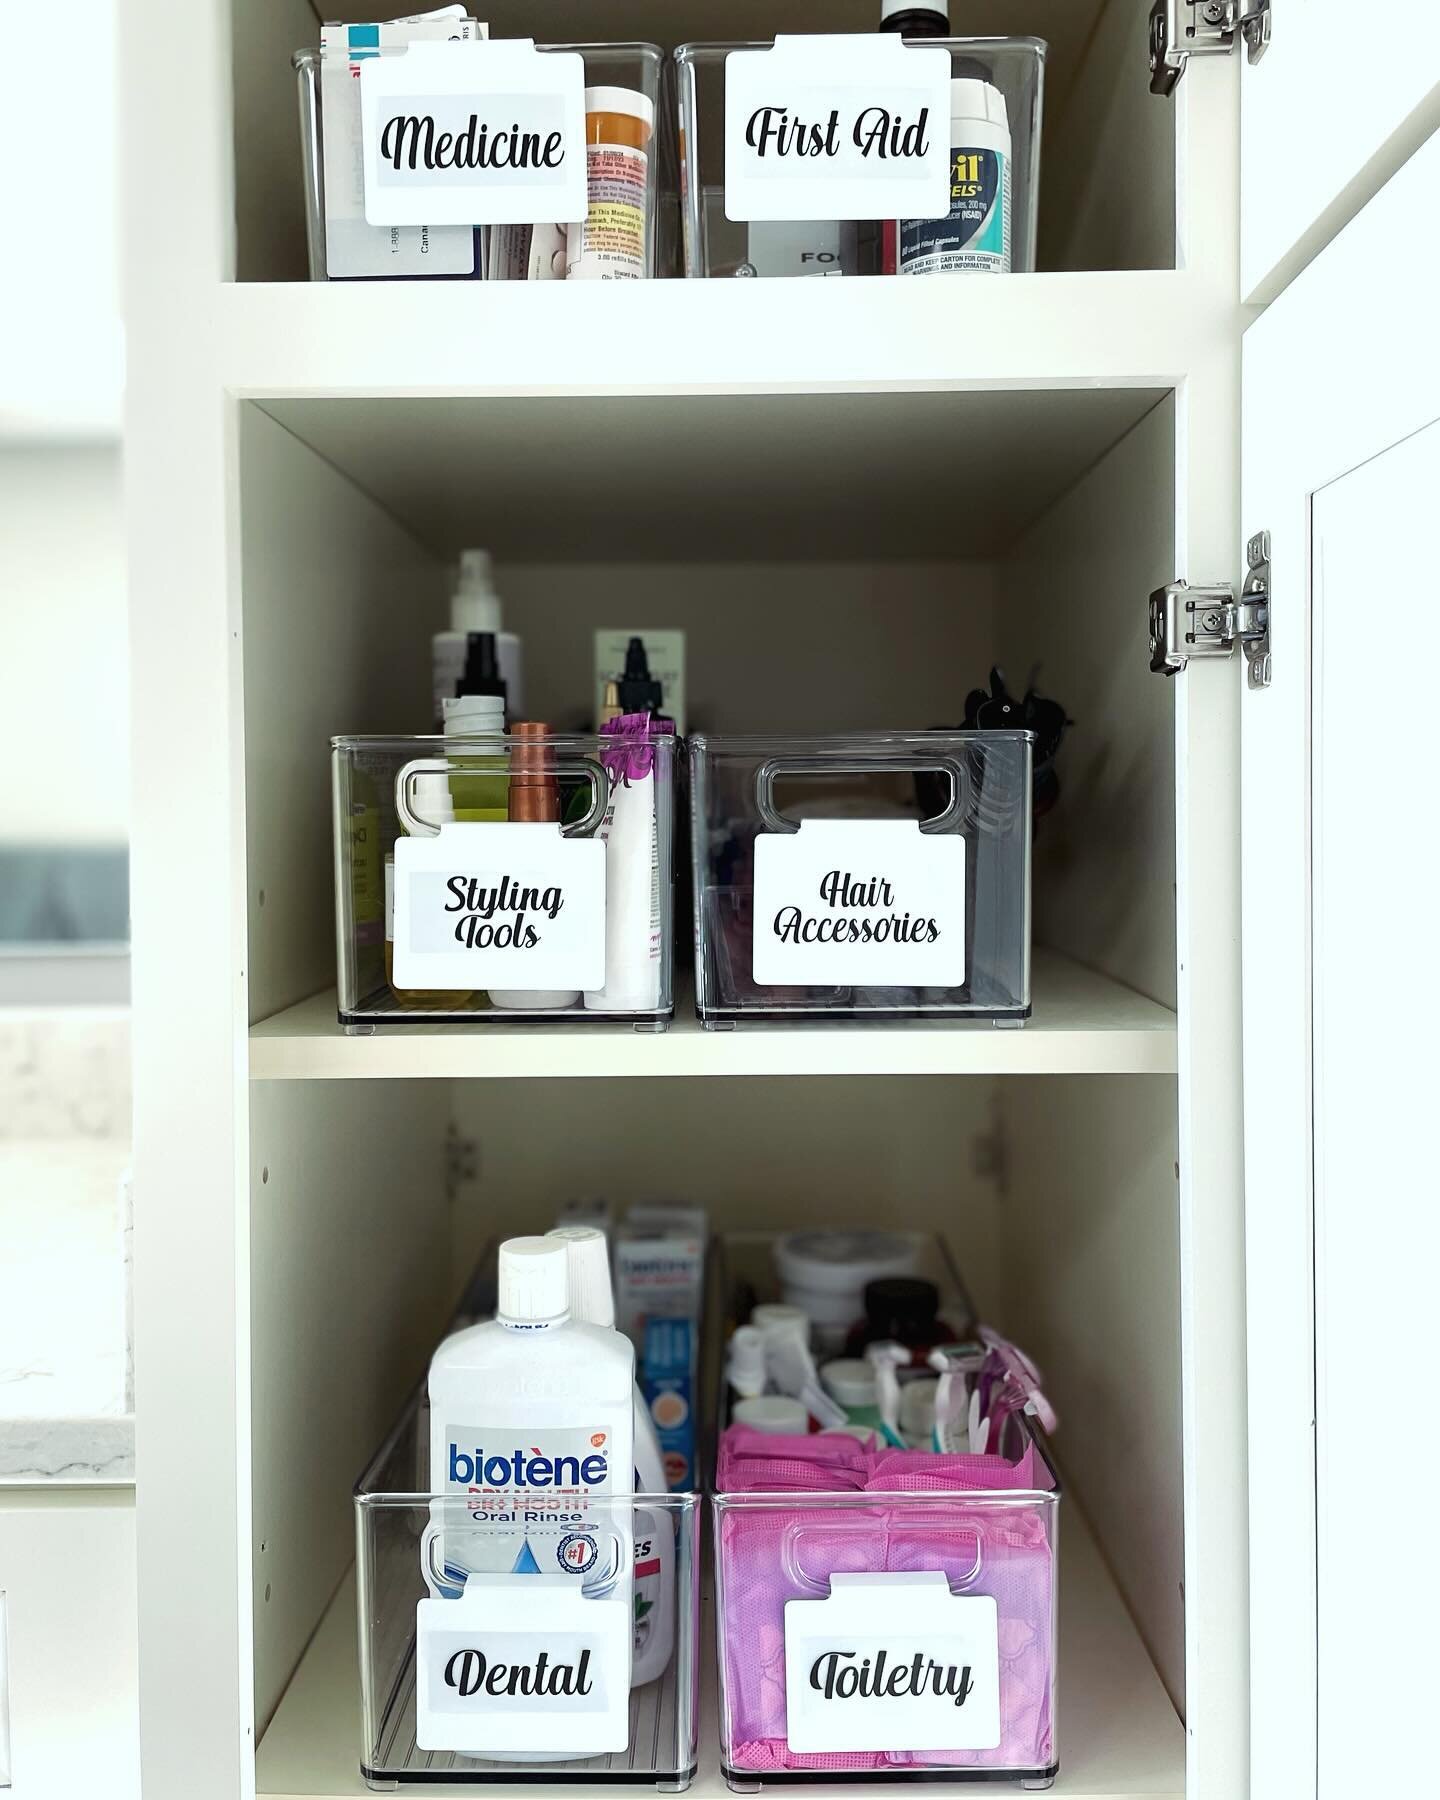 Monday Motivation⚜️

Deep bathroom cabinets create a treasure trove of space. We used @mdesign sixteen inch storage bins to create &ldquo;pullout drawers&rdquo; and prevent items from getting lost in the back. A small investment in simple organizing 